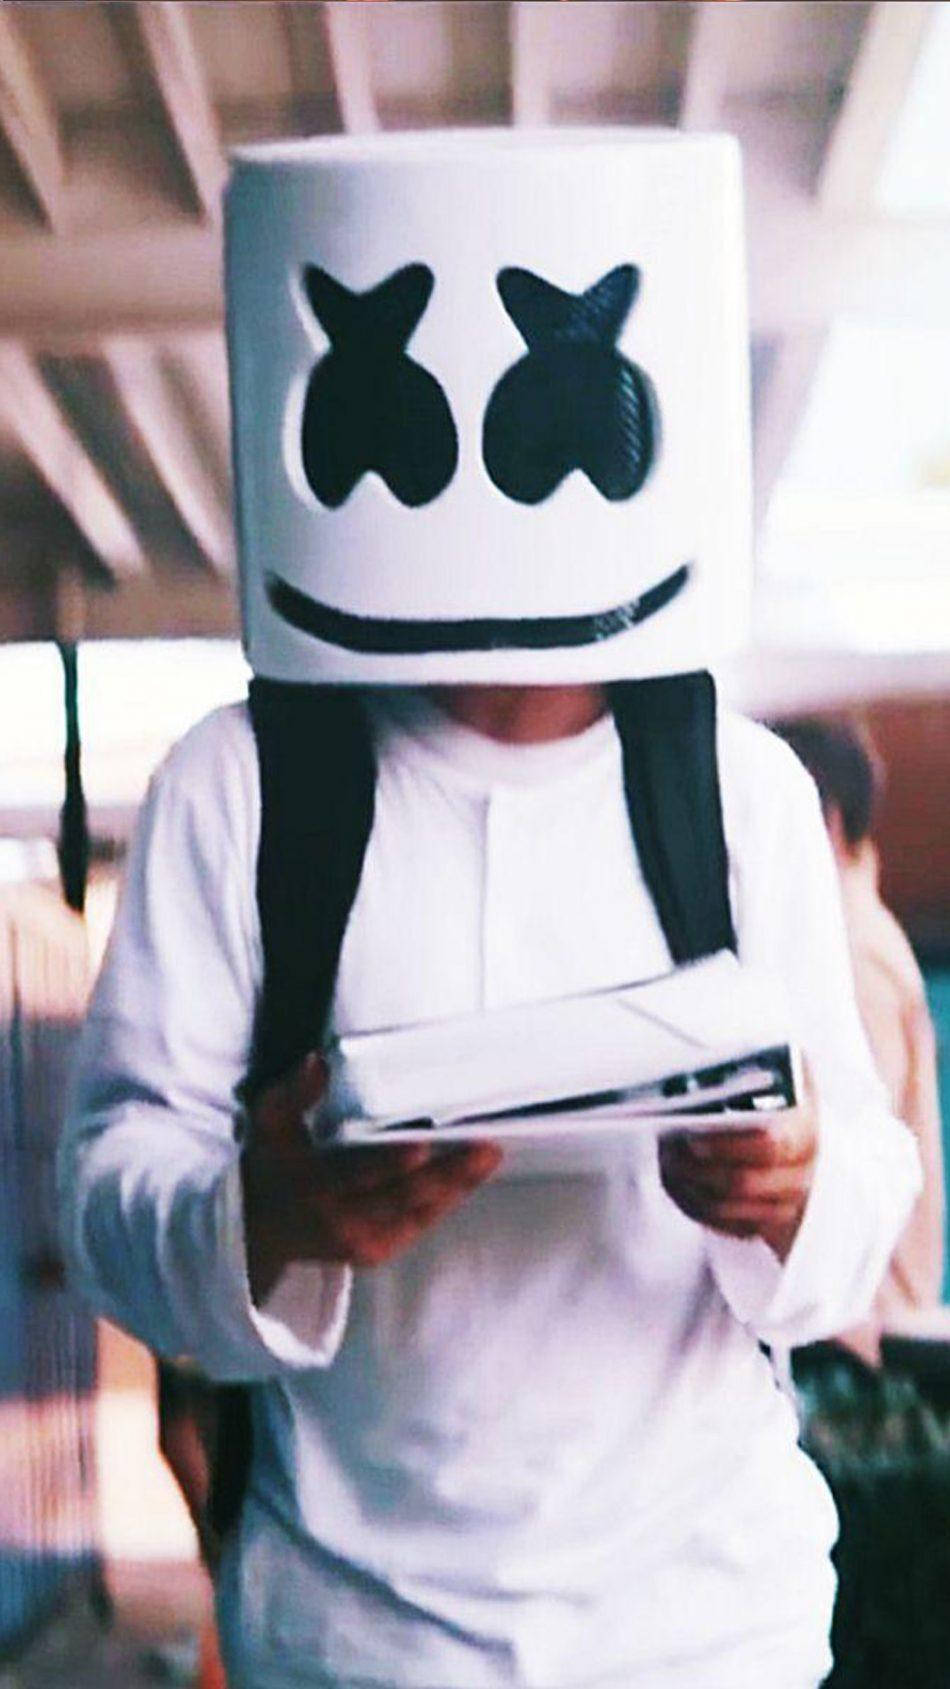 Neon Marshmello wallpaper by THE_SUPPPERB - Download on ZEDGE™ | c045